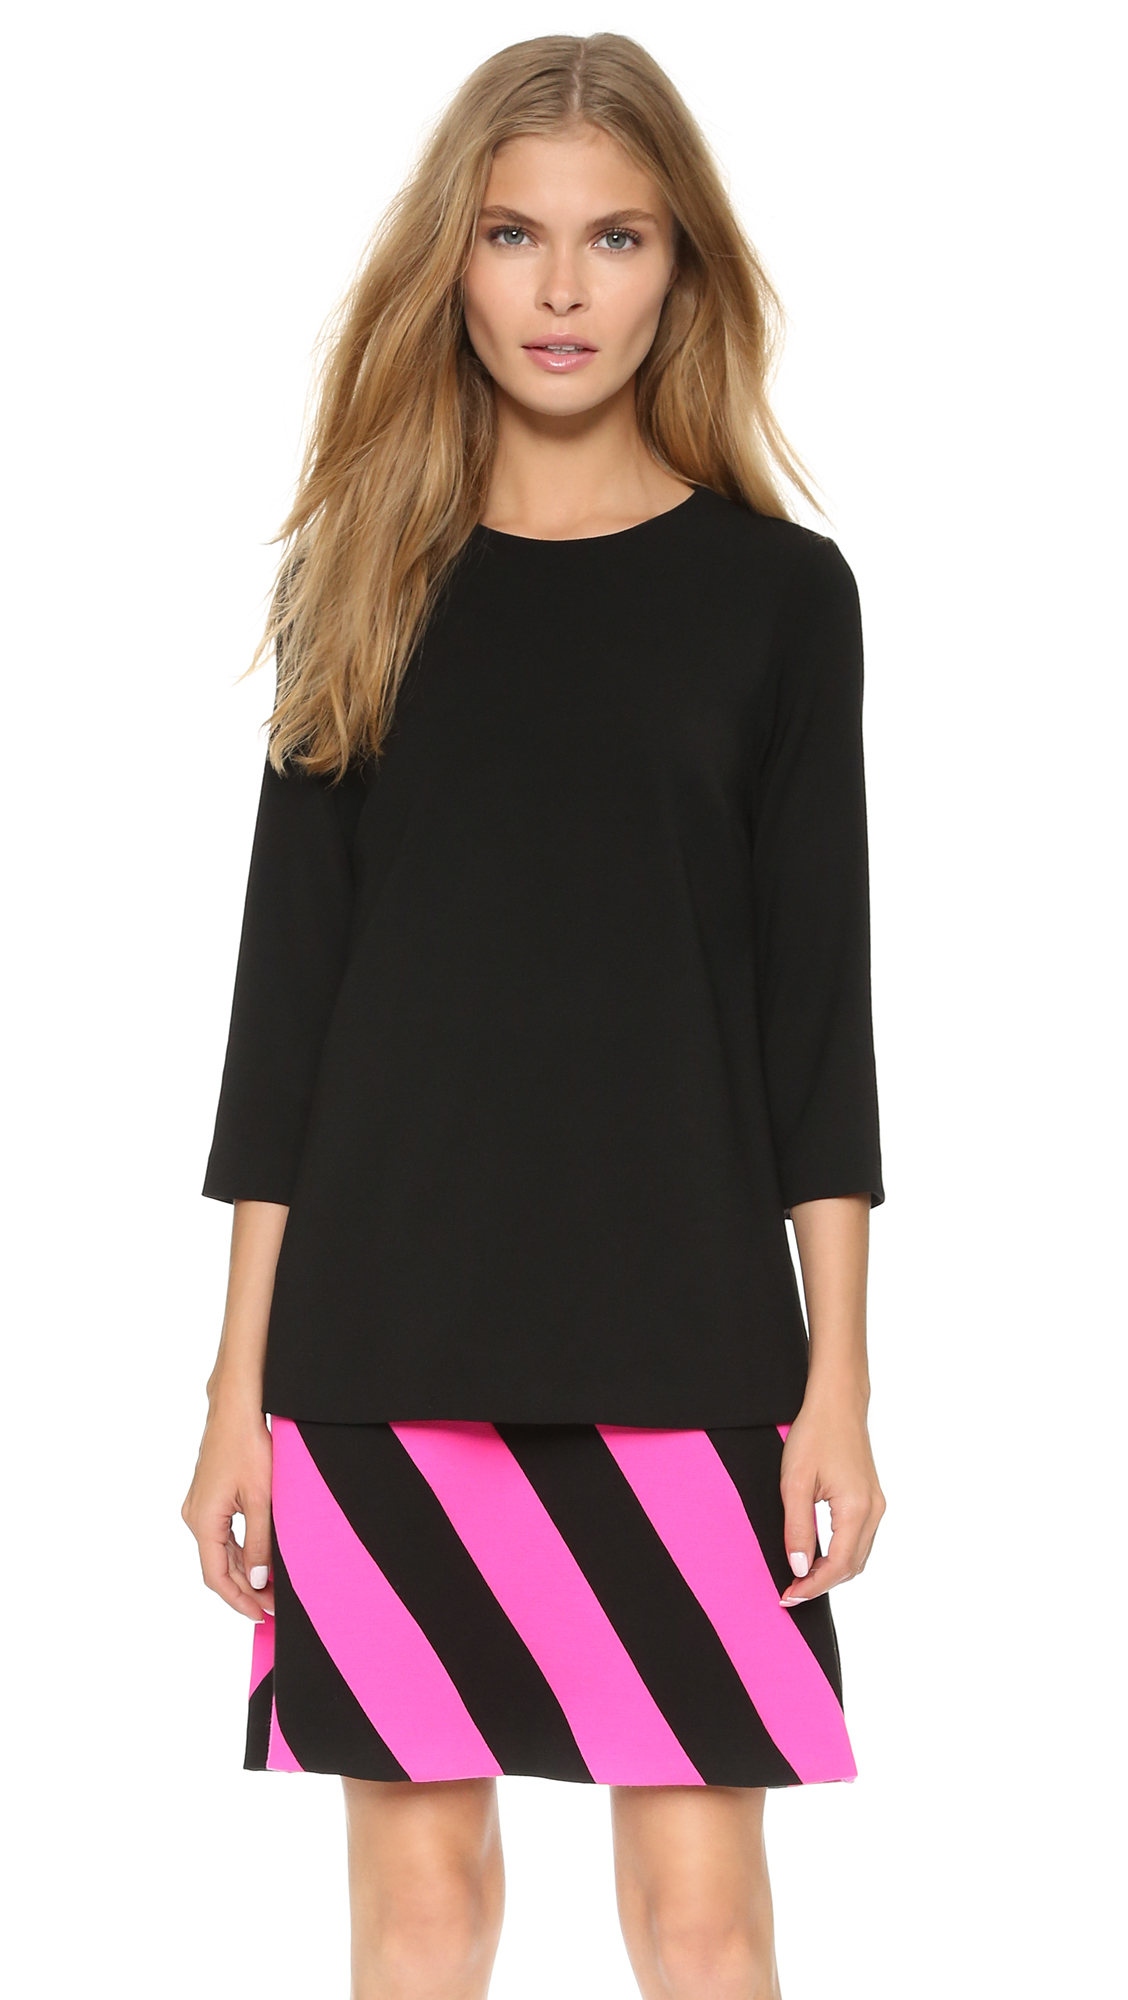 Lyst - Lisa Perry Caution Dress - Black/hot Pink in Black